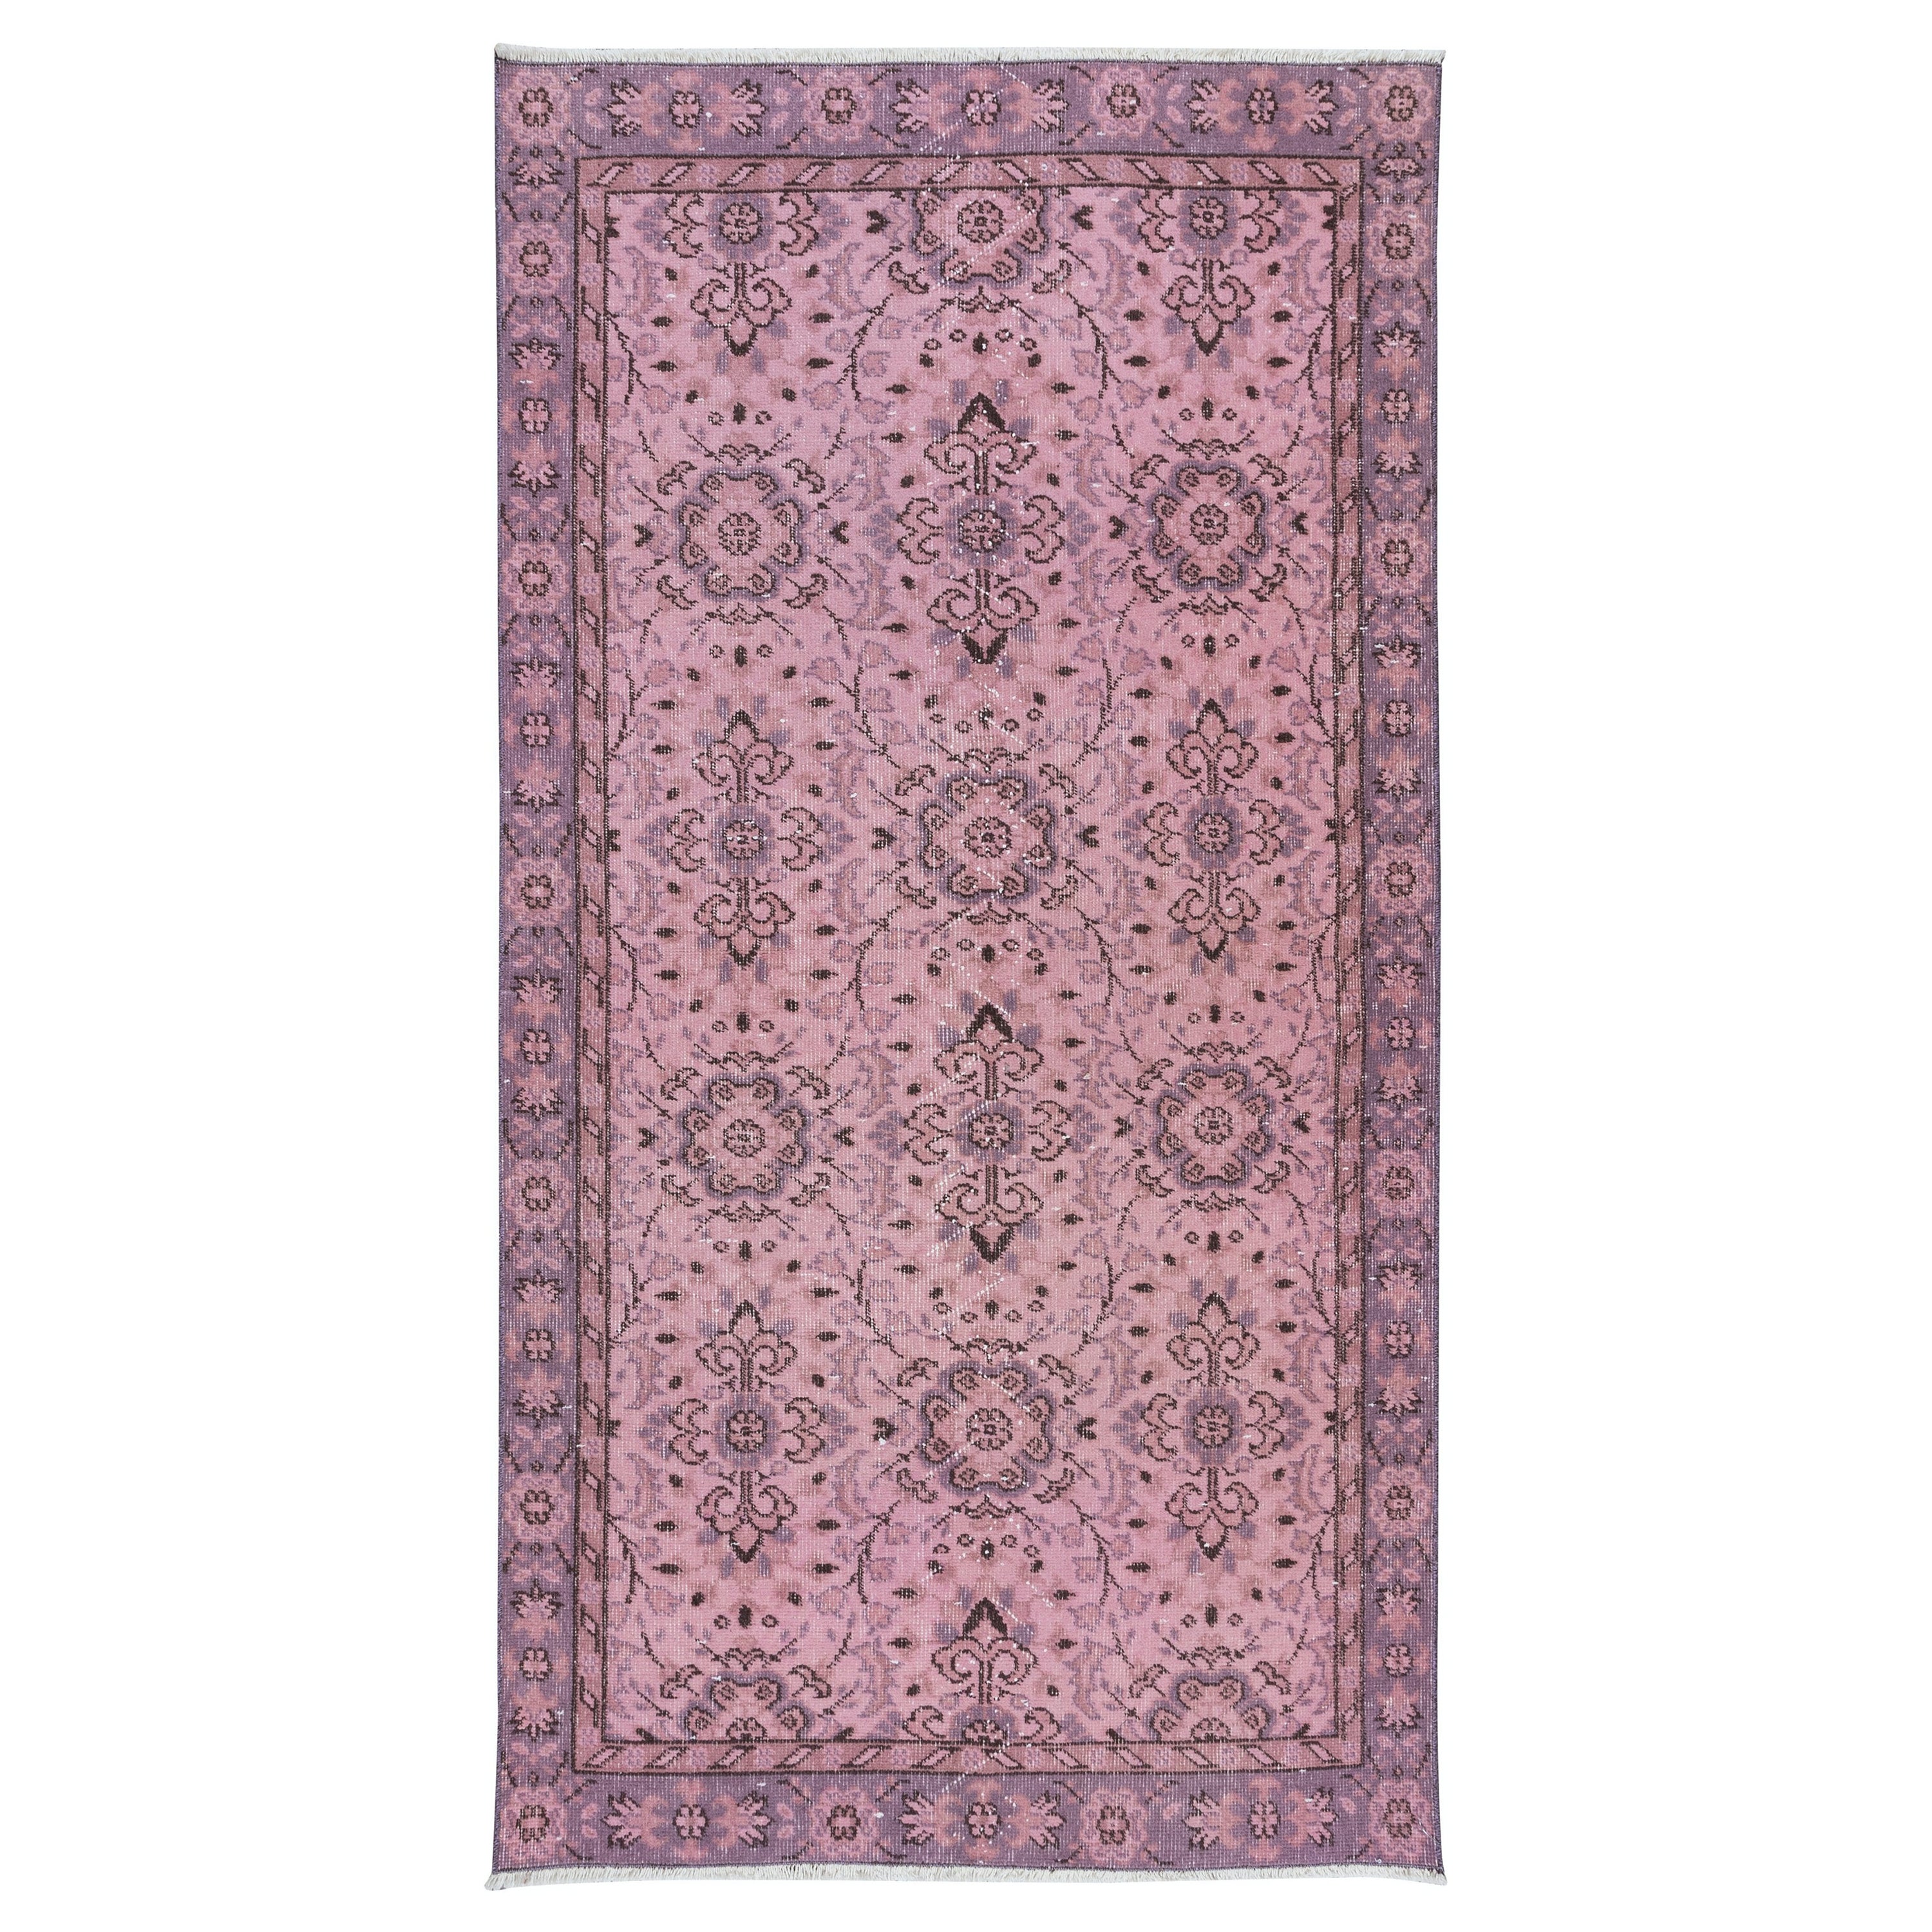 3.5x6.6 Ft Modern Handmade Pink Rug with Rustic Italian Mediterranean Style For Sale